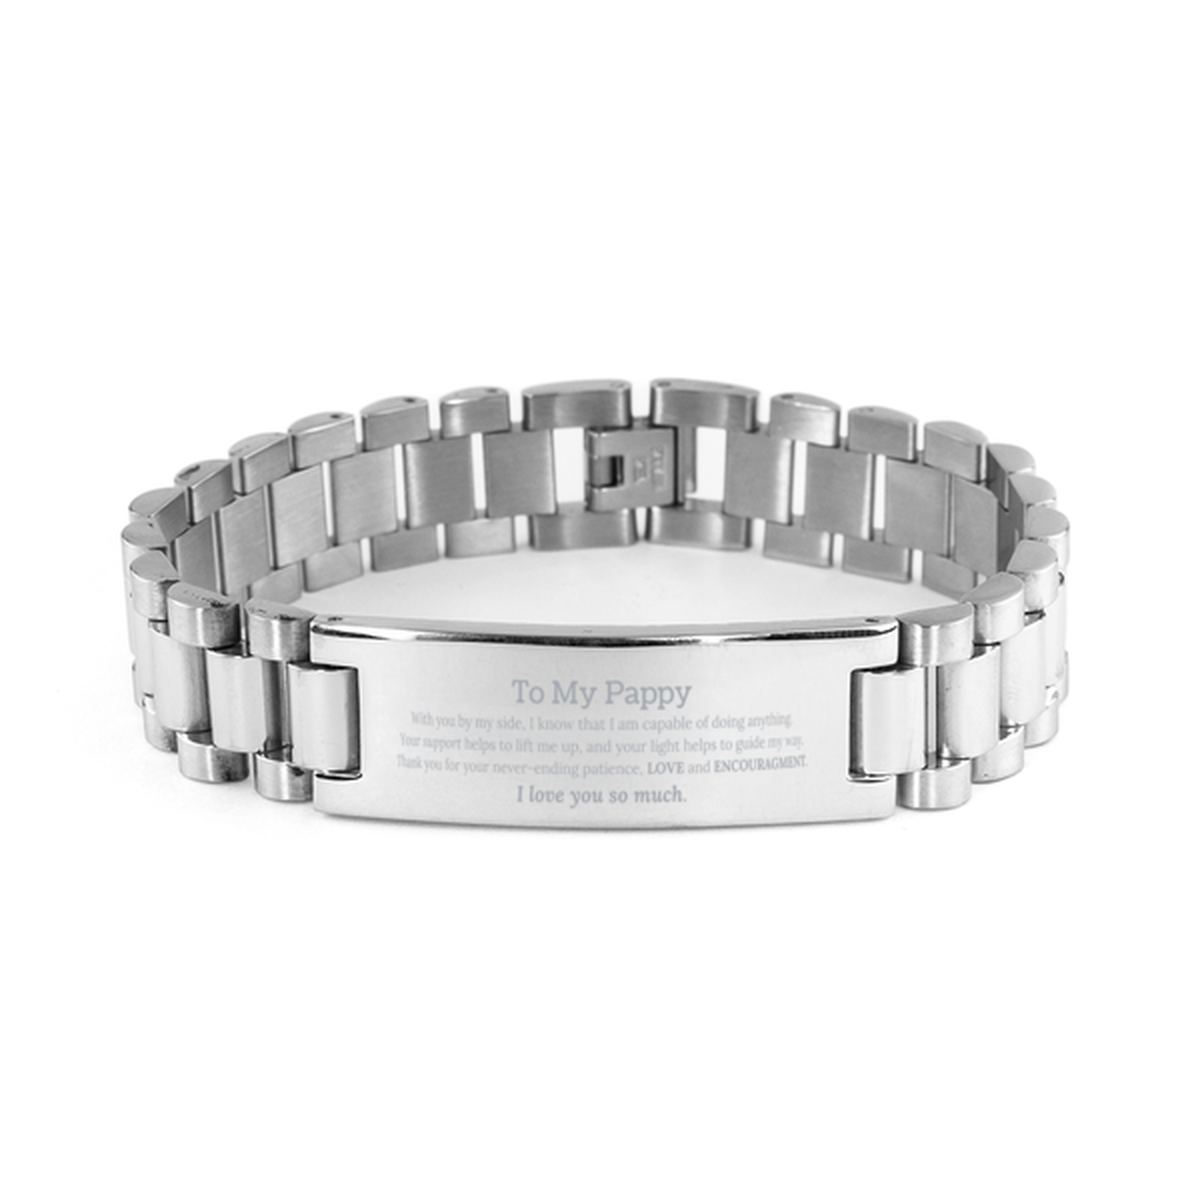 Appreciation Pappy Ladder Stainless Steel Bracelet Gifts, To My Pappy Birthday Christmas Wedding Keepsake Gifts for Pappy With you by my side, I know that I am capable of doing anything. I love you so much